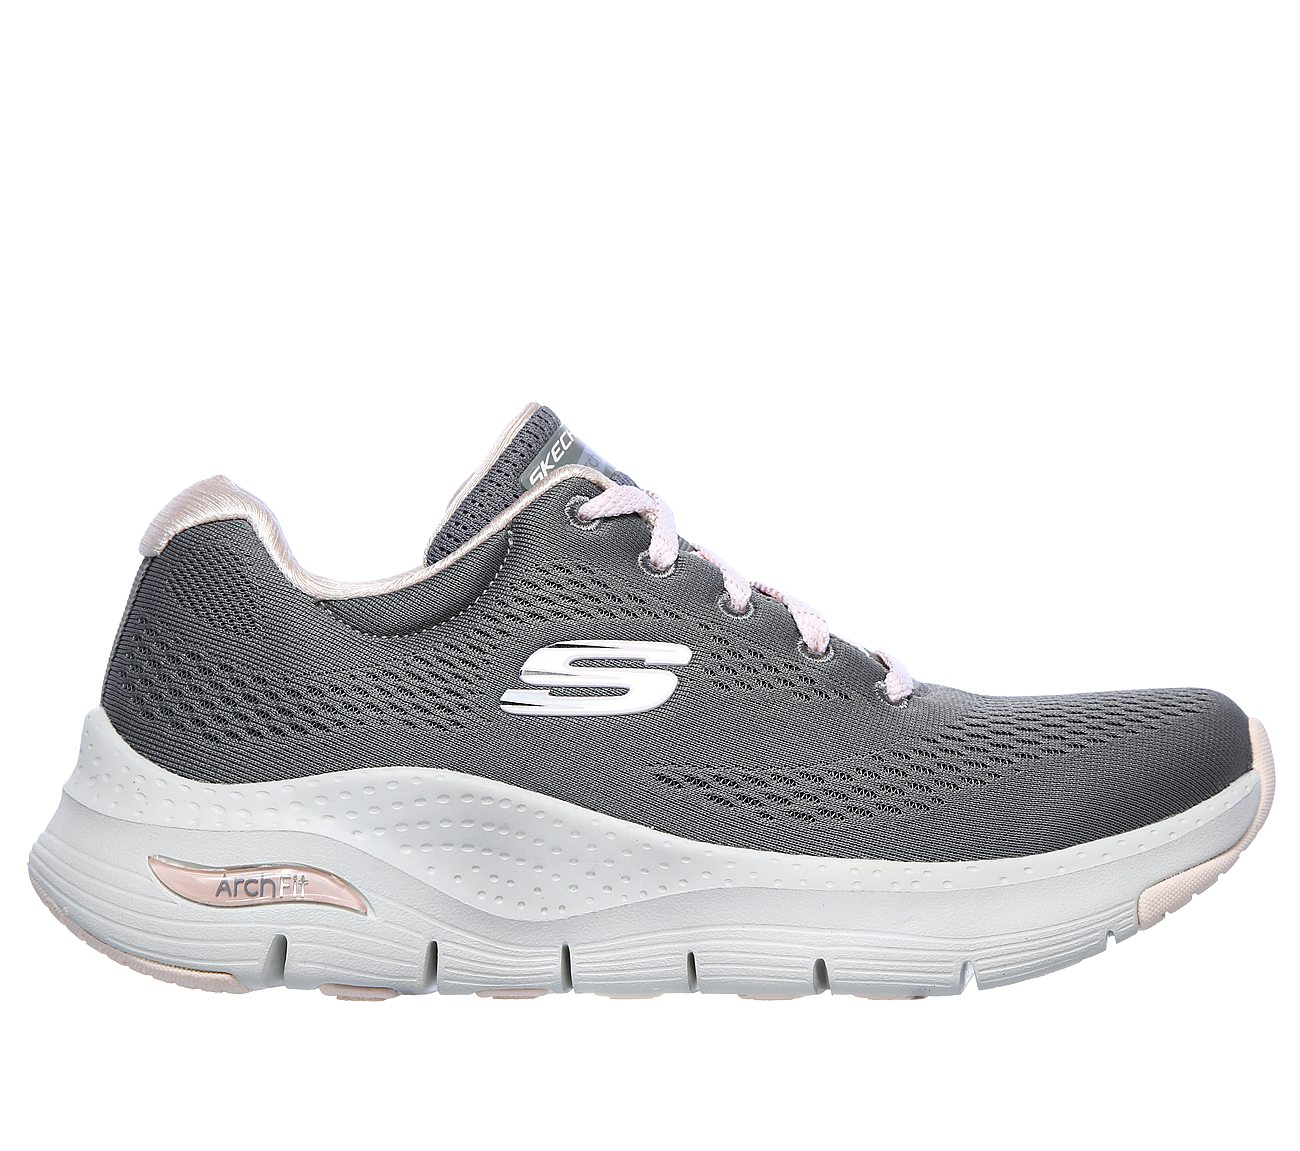 Sunny Outlook Skechers Arch Fit Shoes